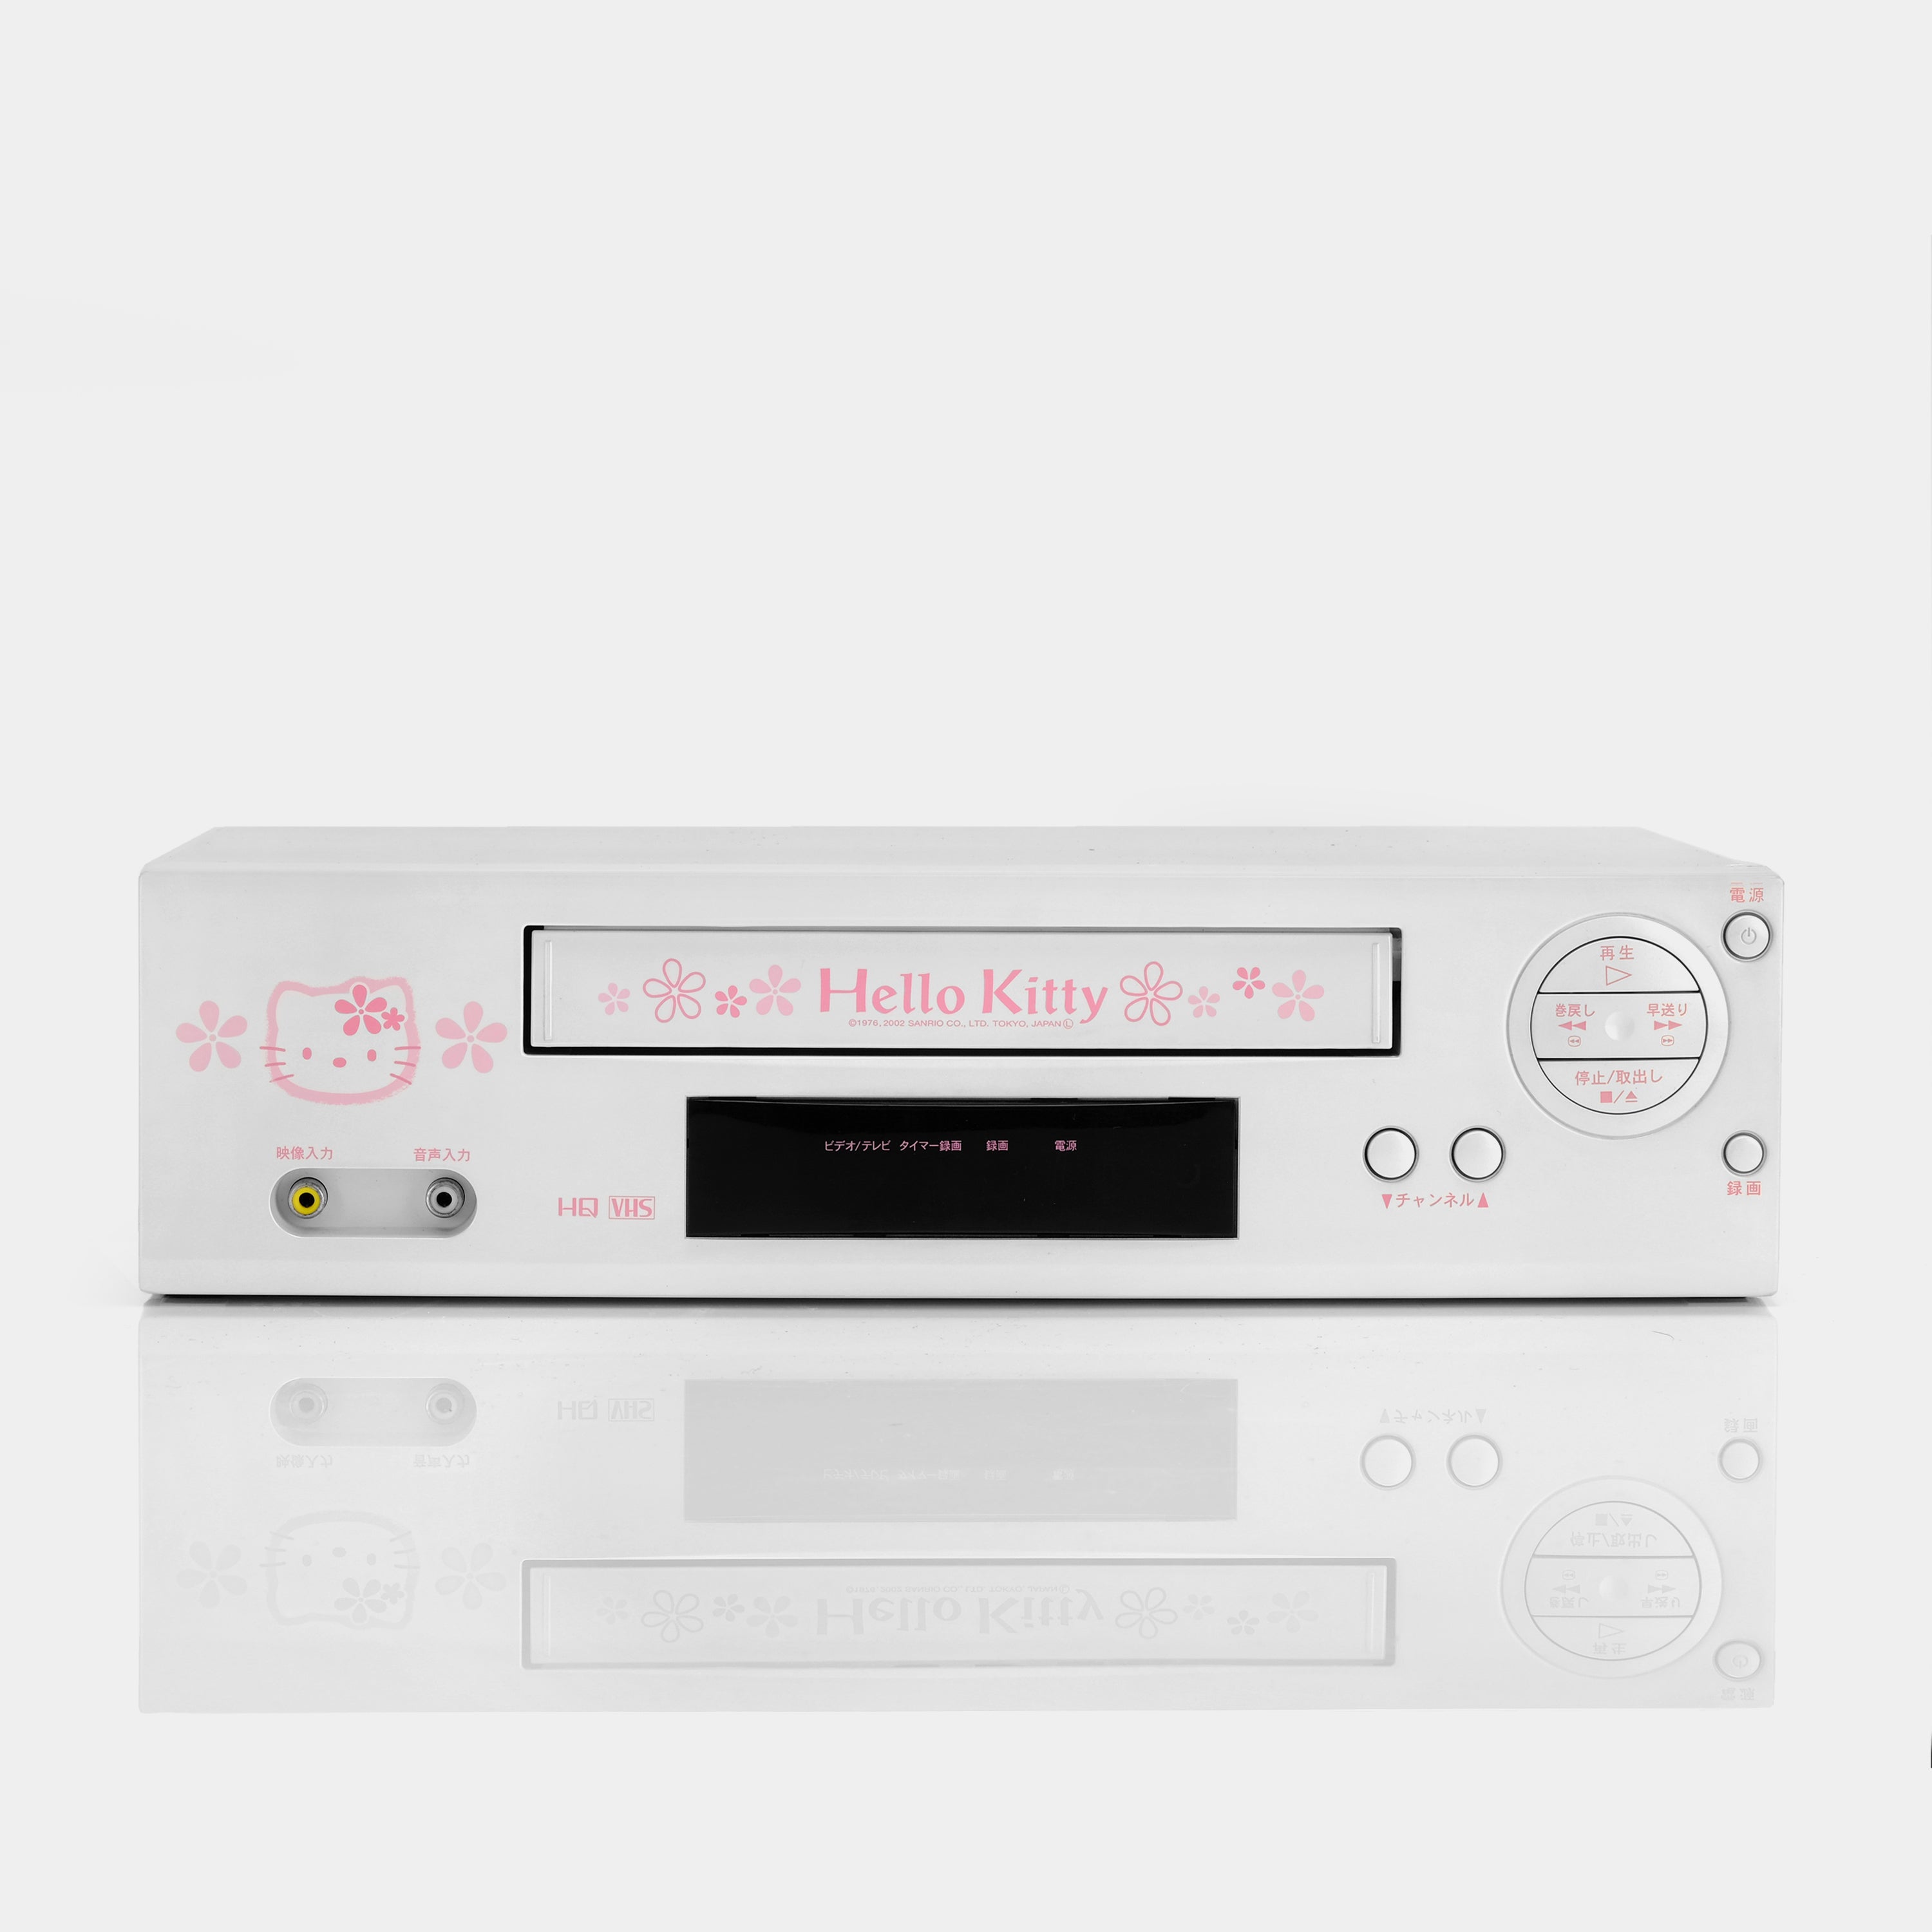 Orion VCR-KT8 Hello Kitty VCR VHS Player